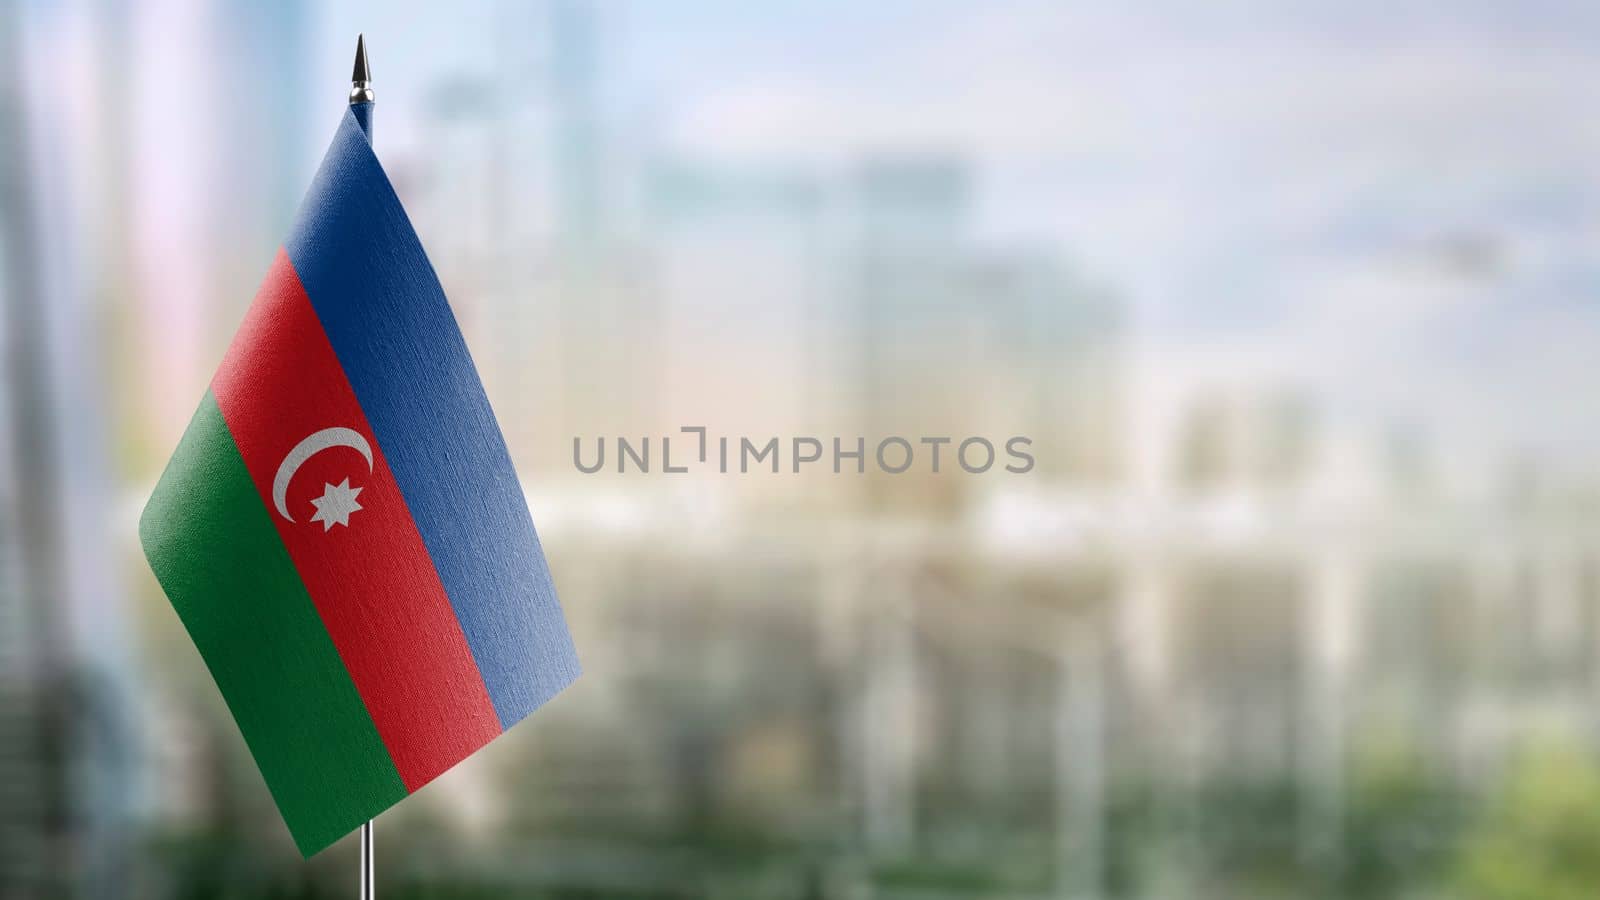 Small flags of the Azerbaijan on an abstract blurry background.